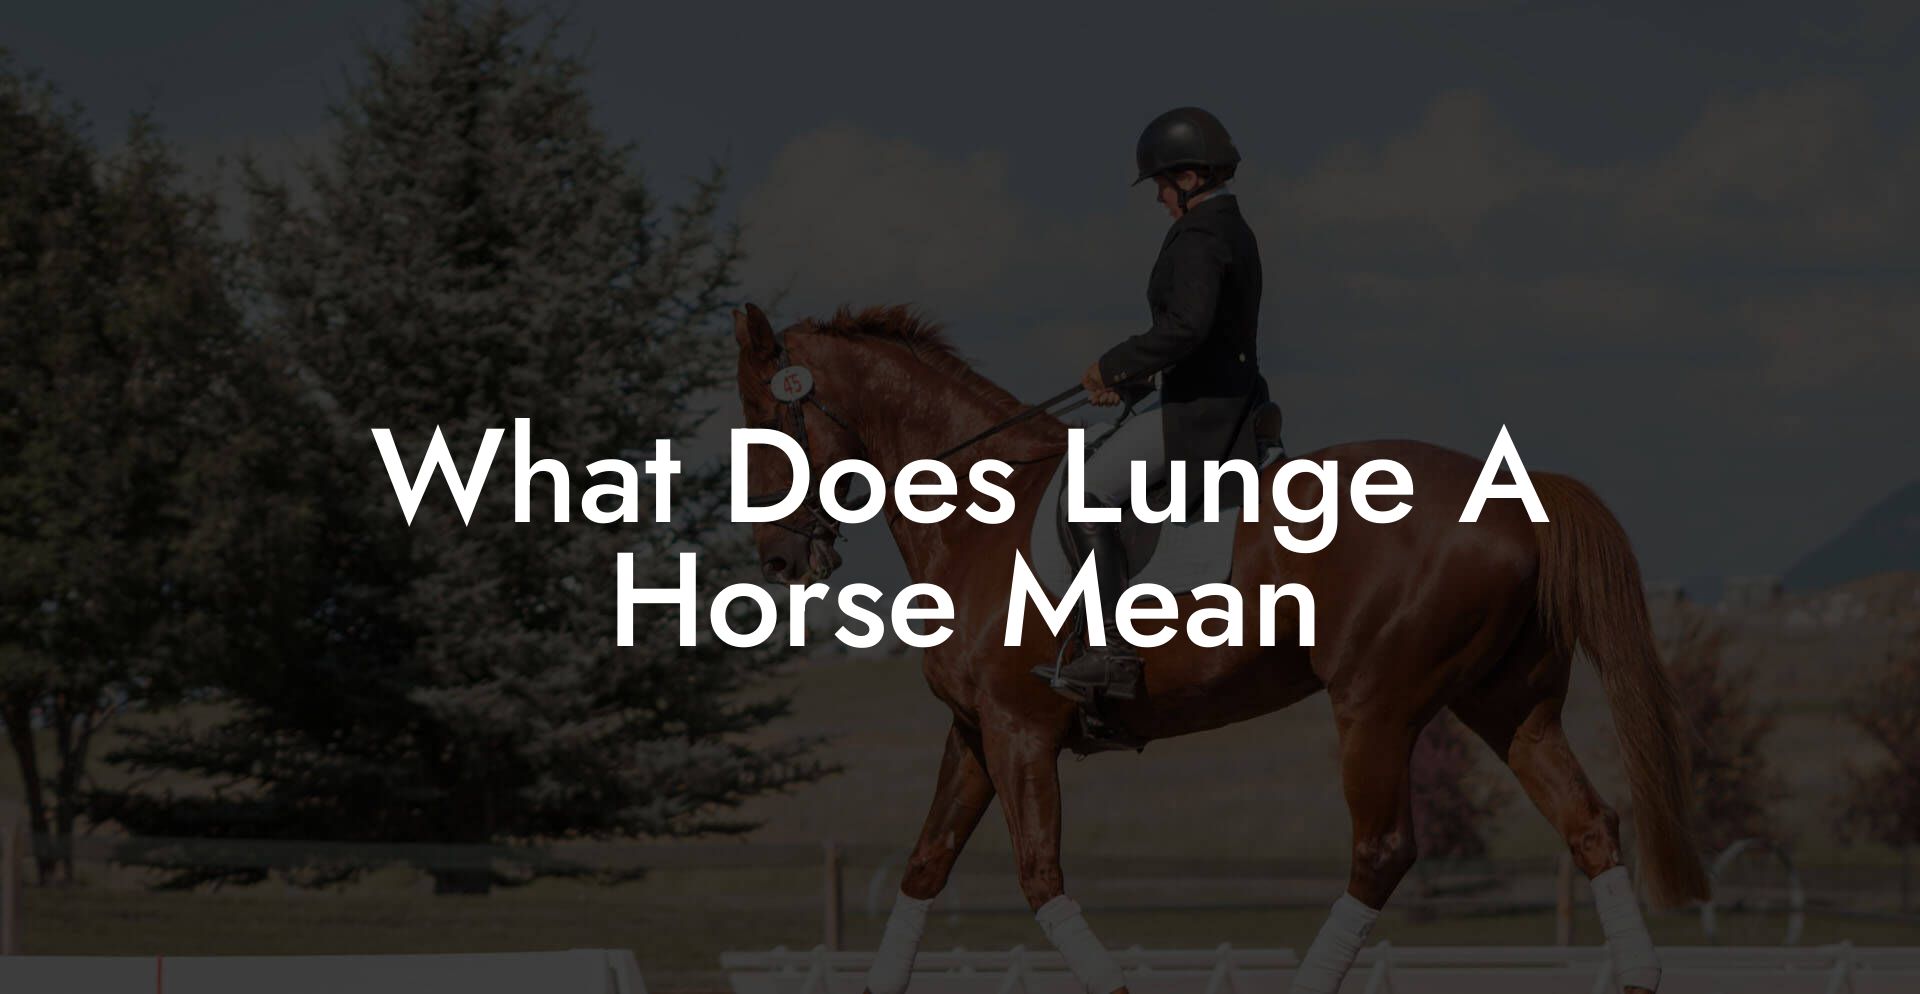 What Does Lunge A Horse Mean